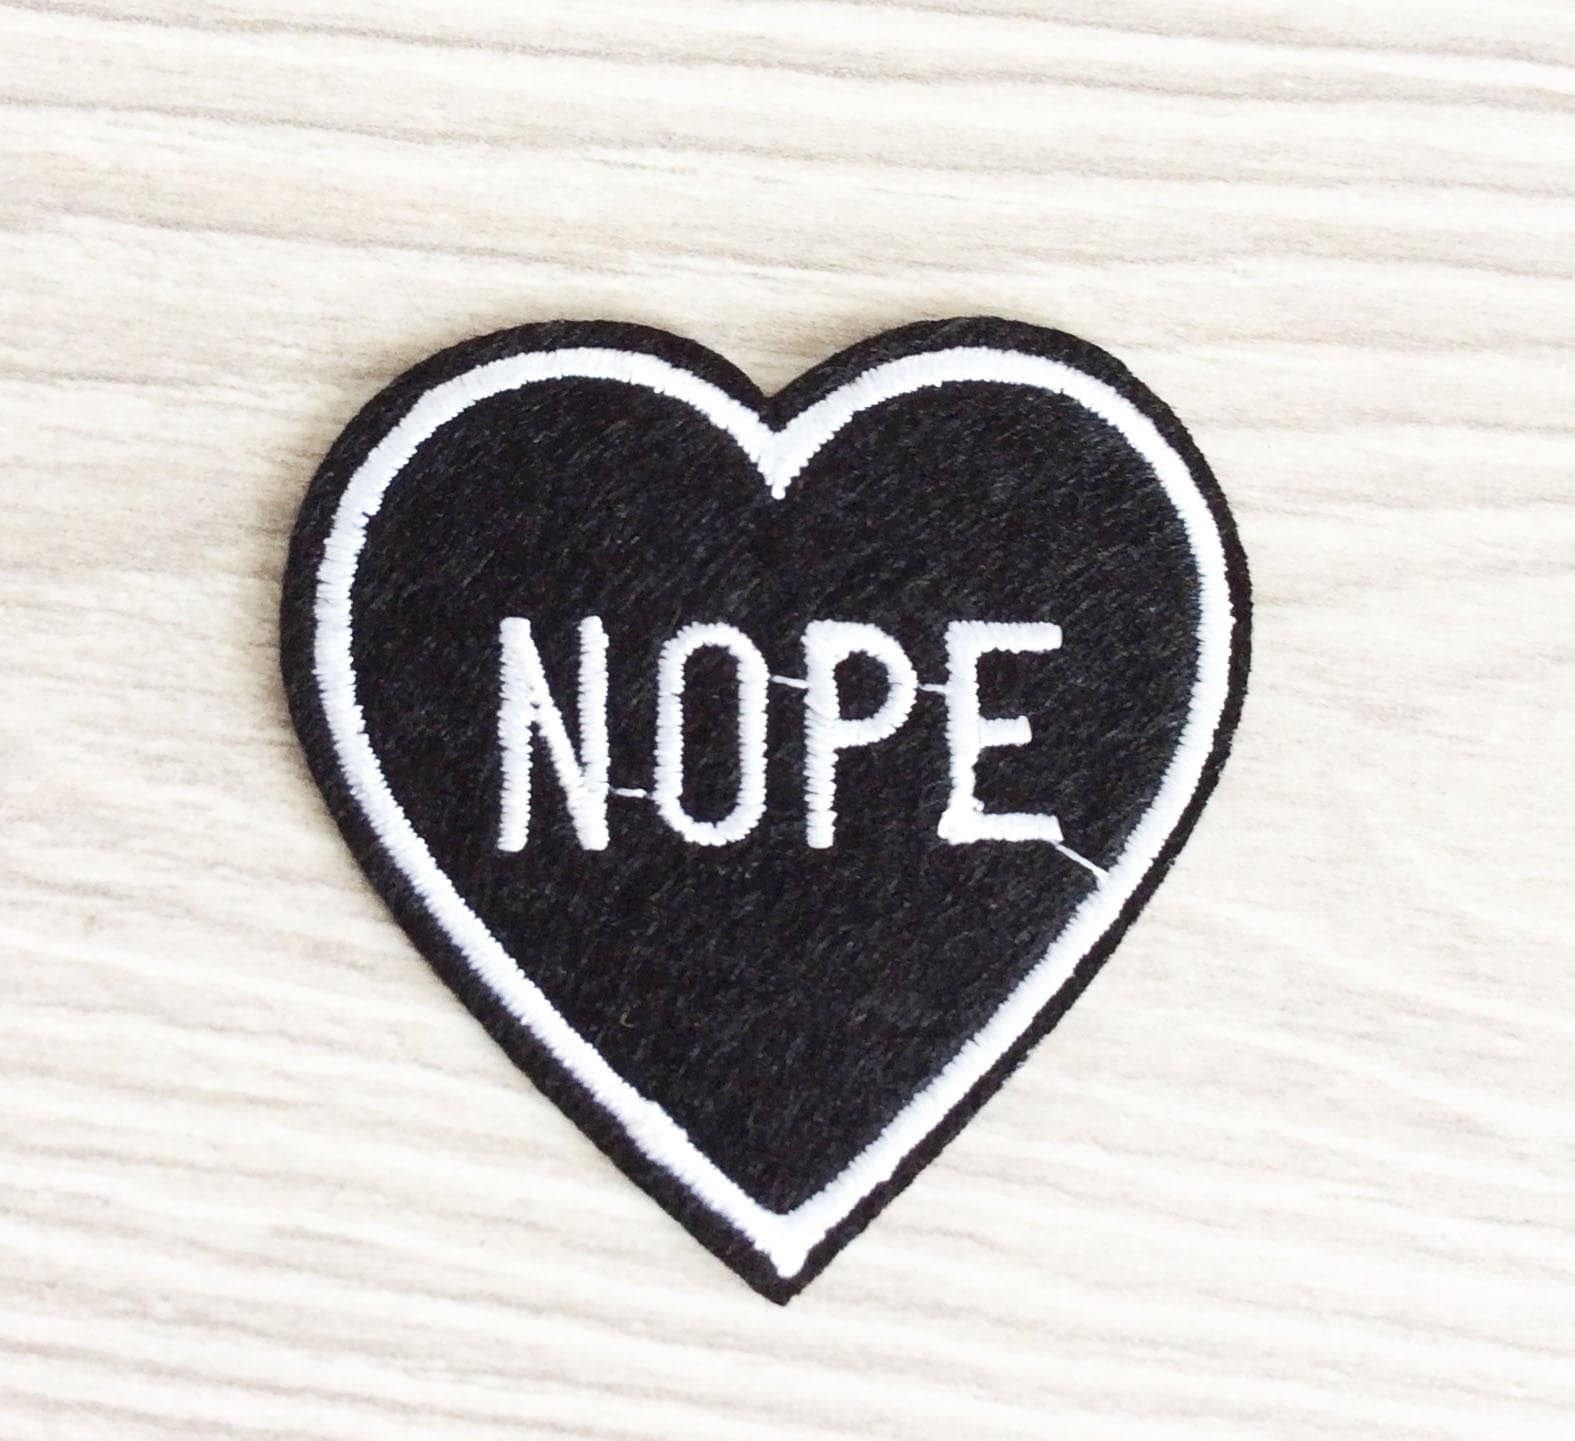 Badge Sew on patch Applique Multicolour Nope Slogan Heart Iron on